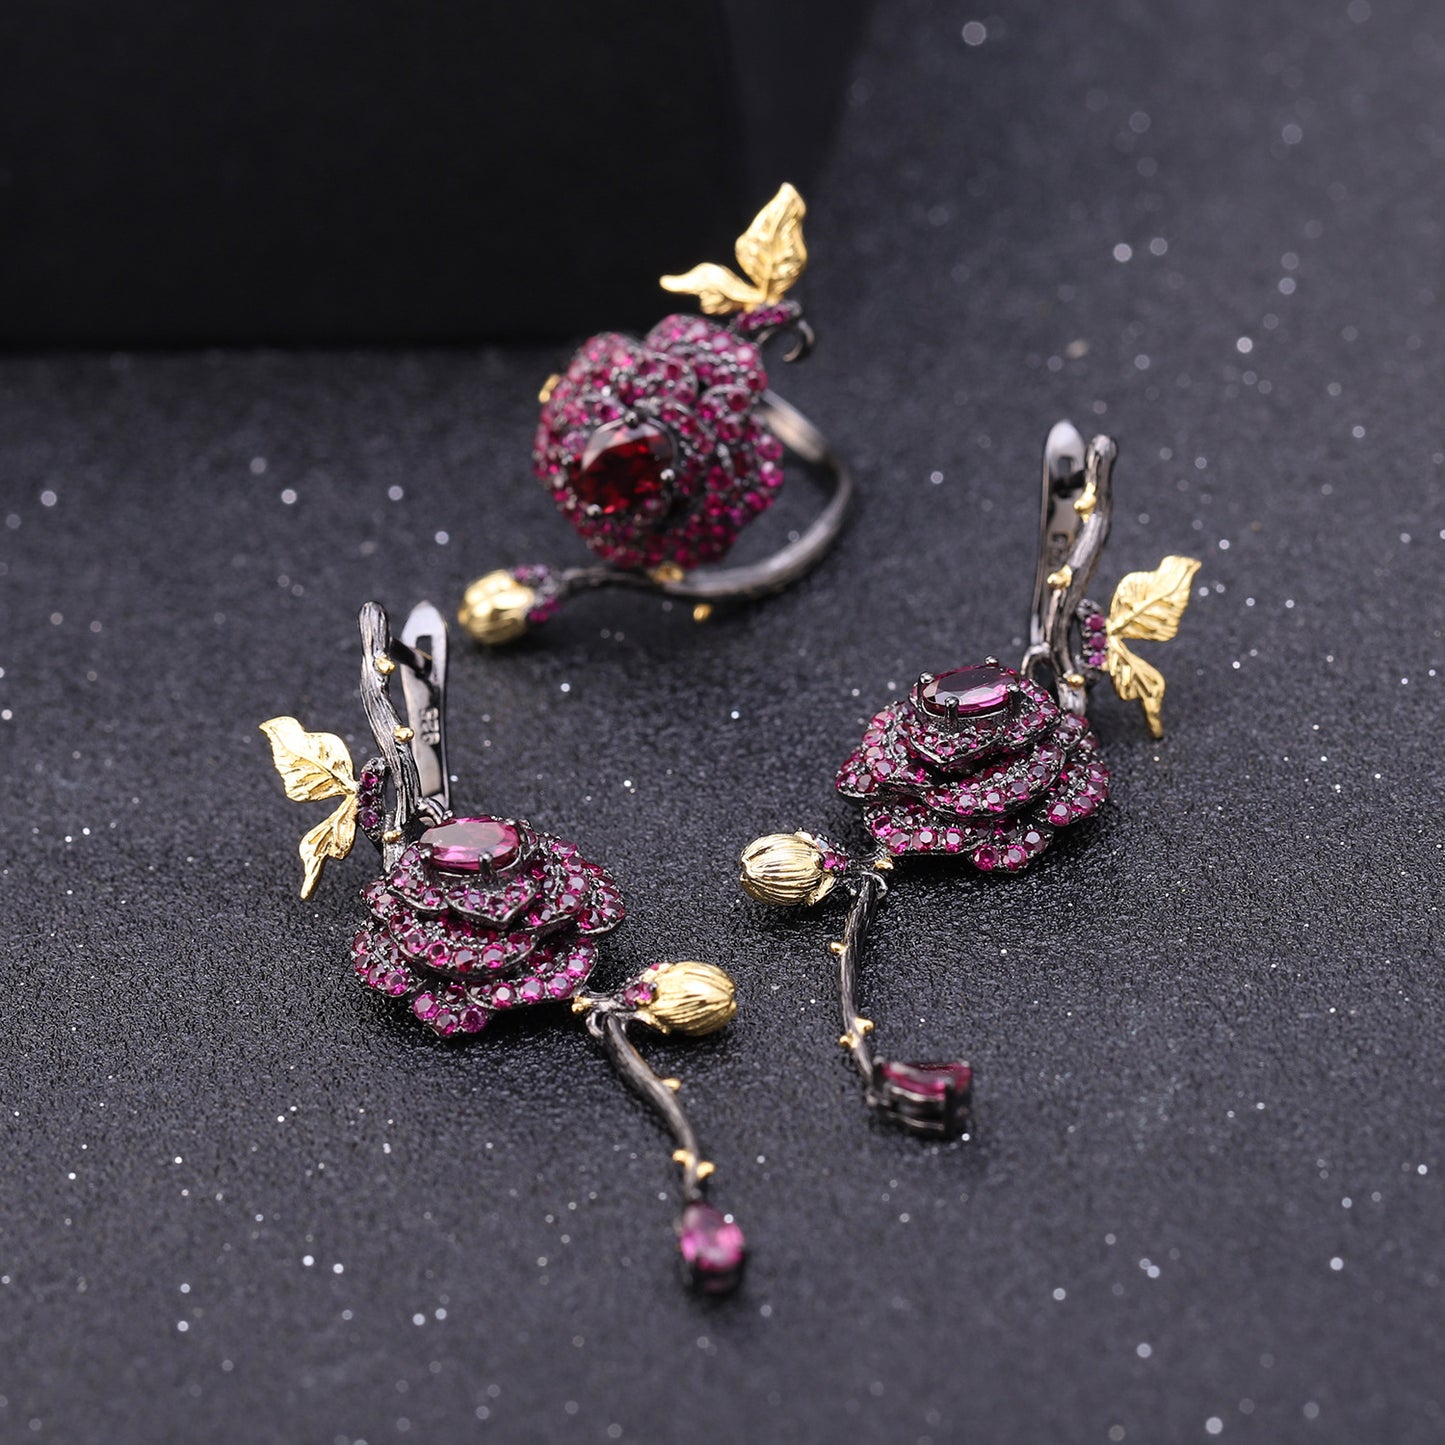 Rose Design s925 Silver Natural Colorful Drop Earrings for Women